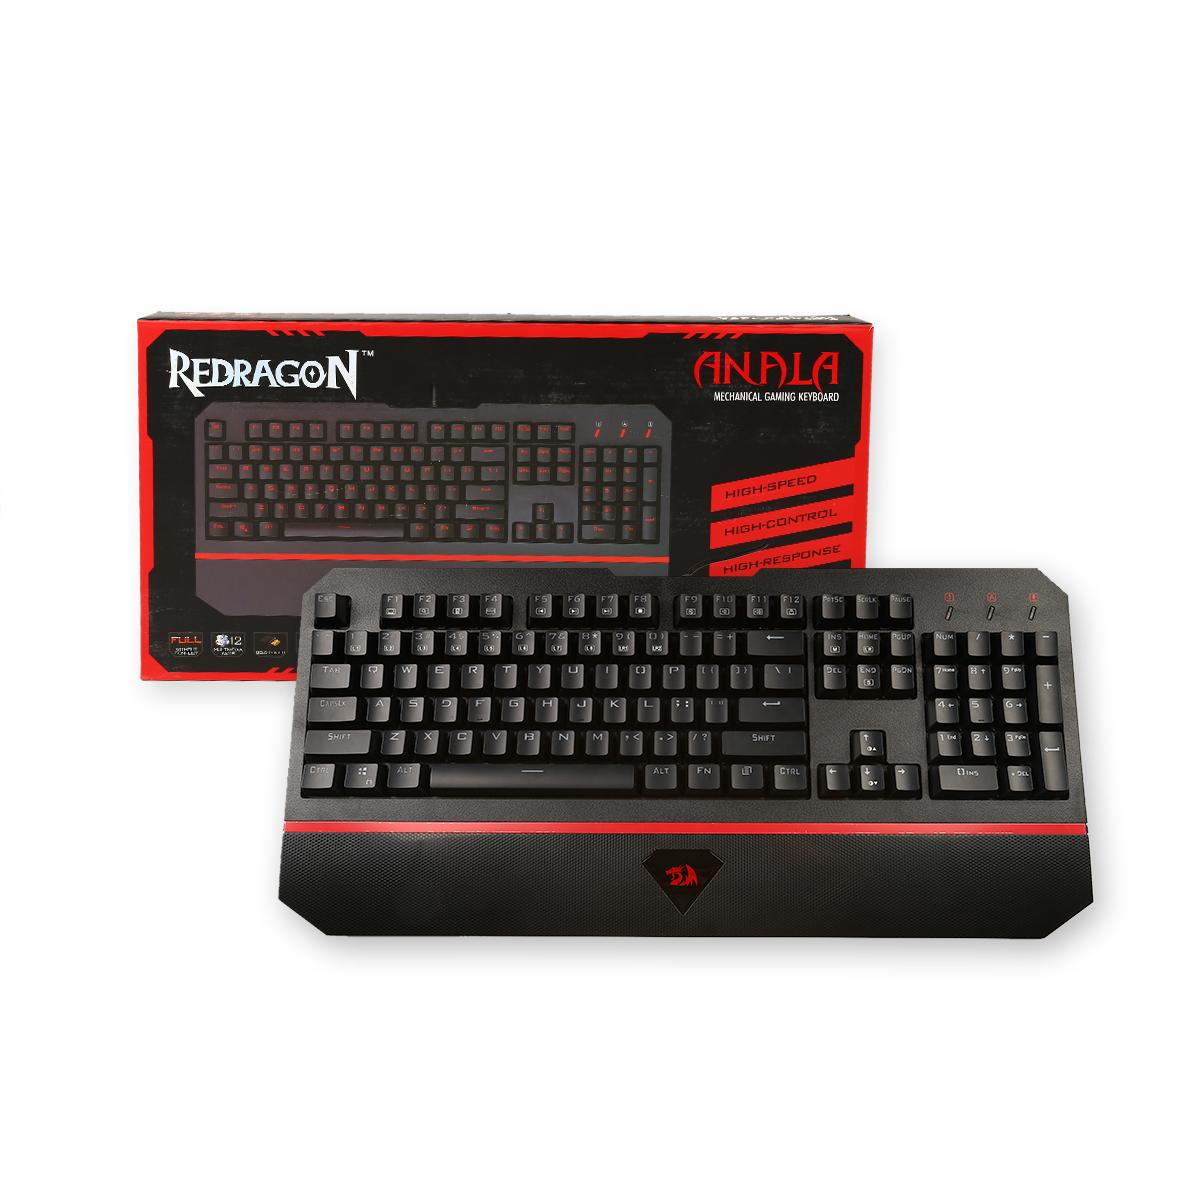 extreme gaming keyboard where the fuck is the manual